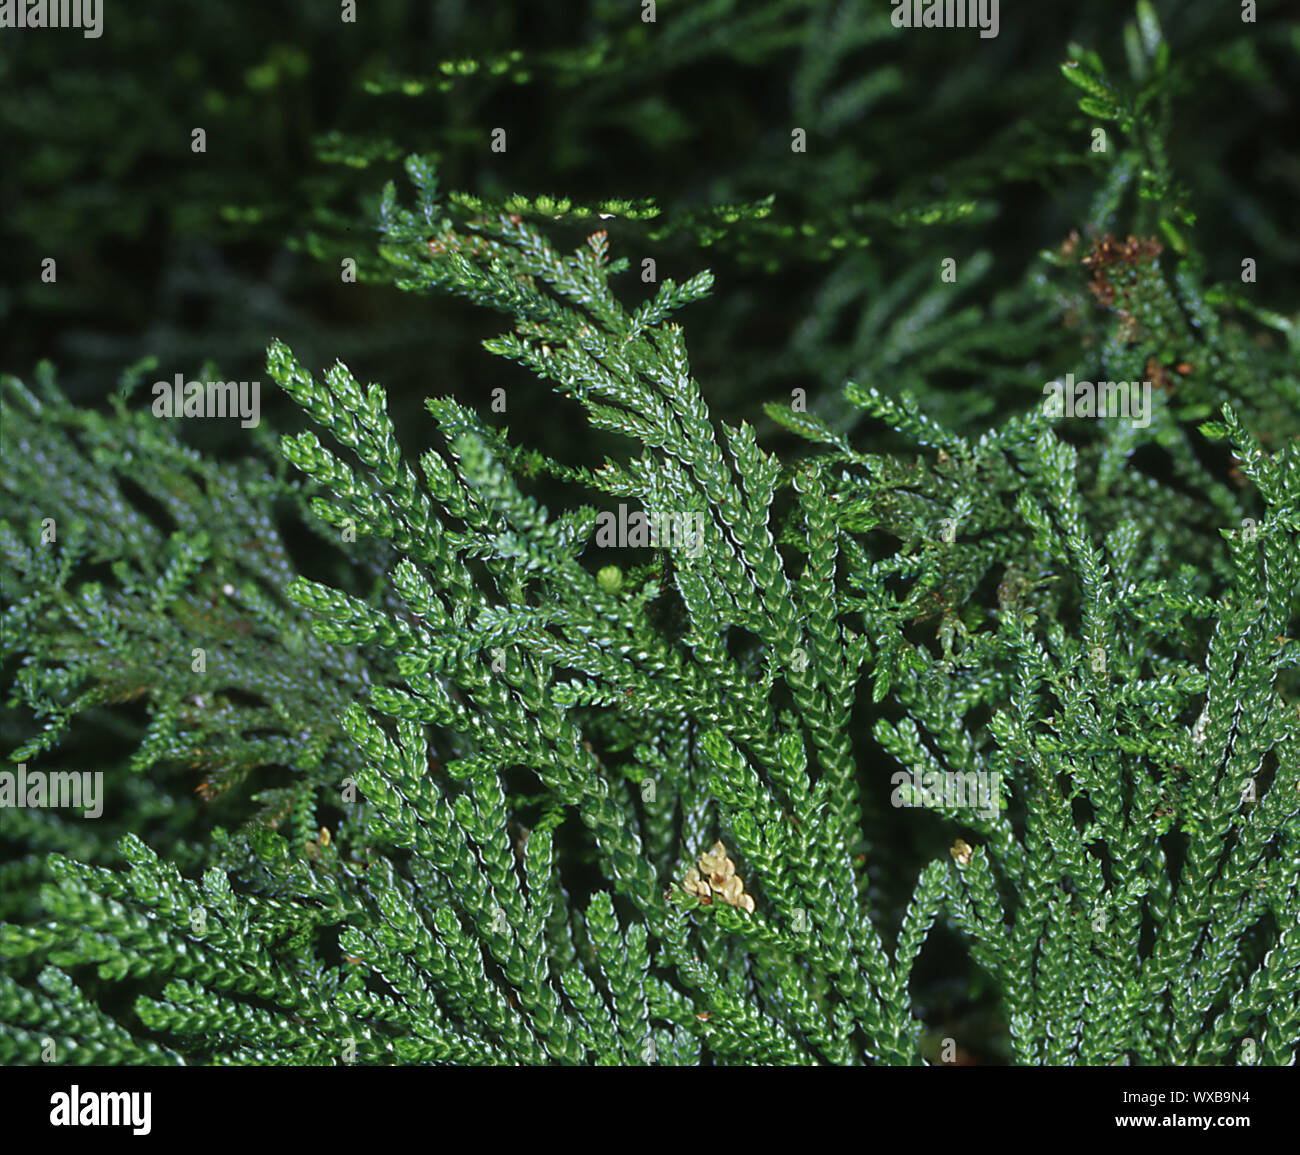 Moss fern with feathery green branches Stock Photo